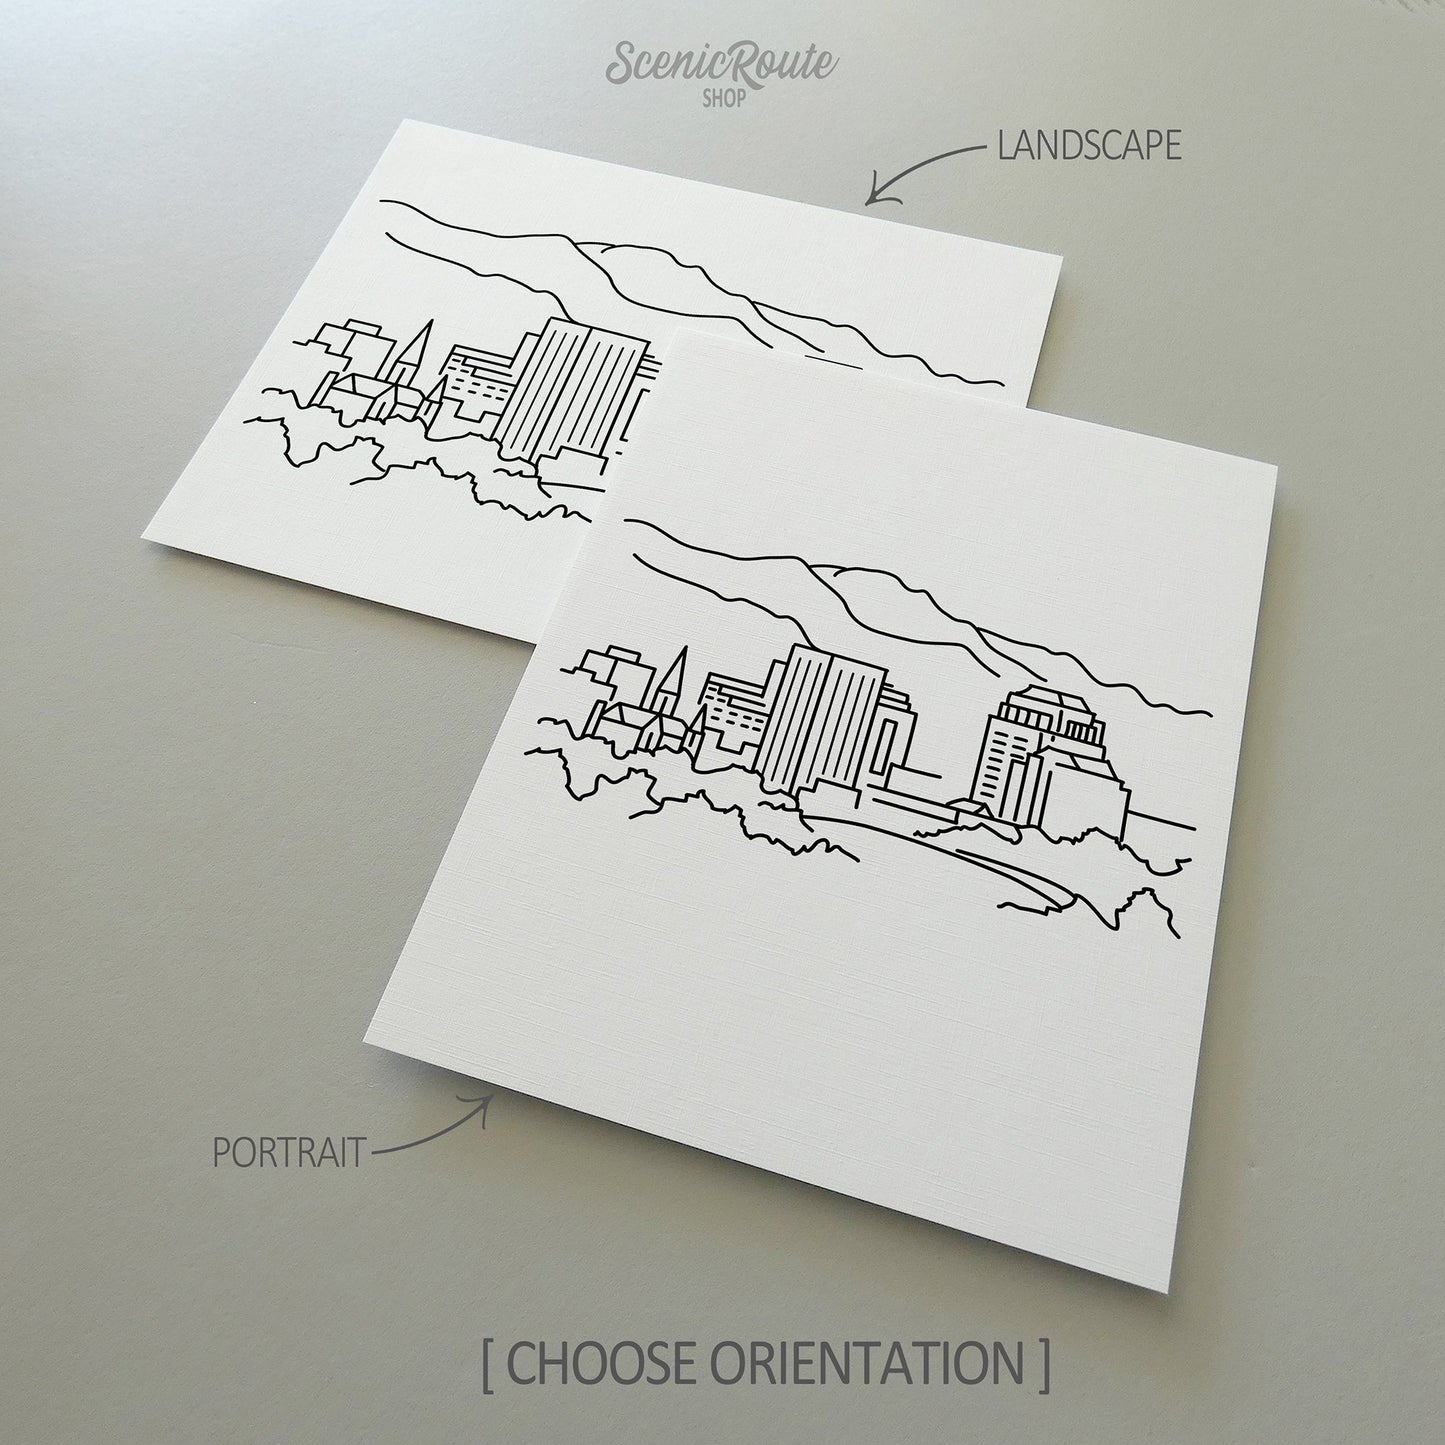 Two line art drawings of the Colorado Springs Skyline on white linen paper with a gray background.  The pieces are shown in portrait and landscape orientation for the available art print options.